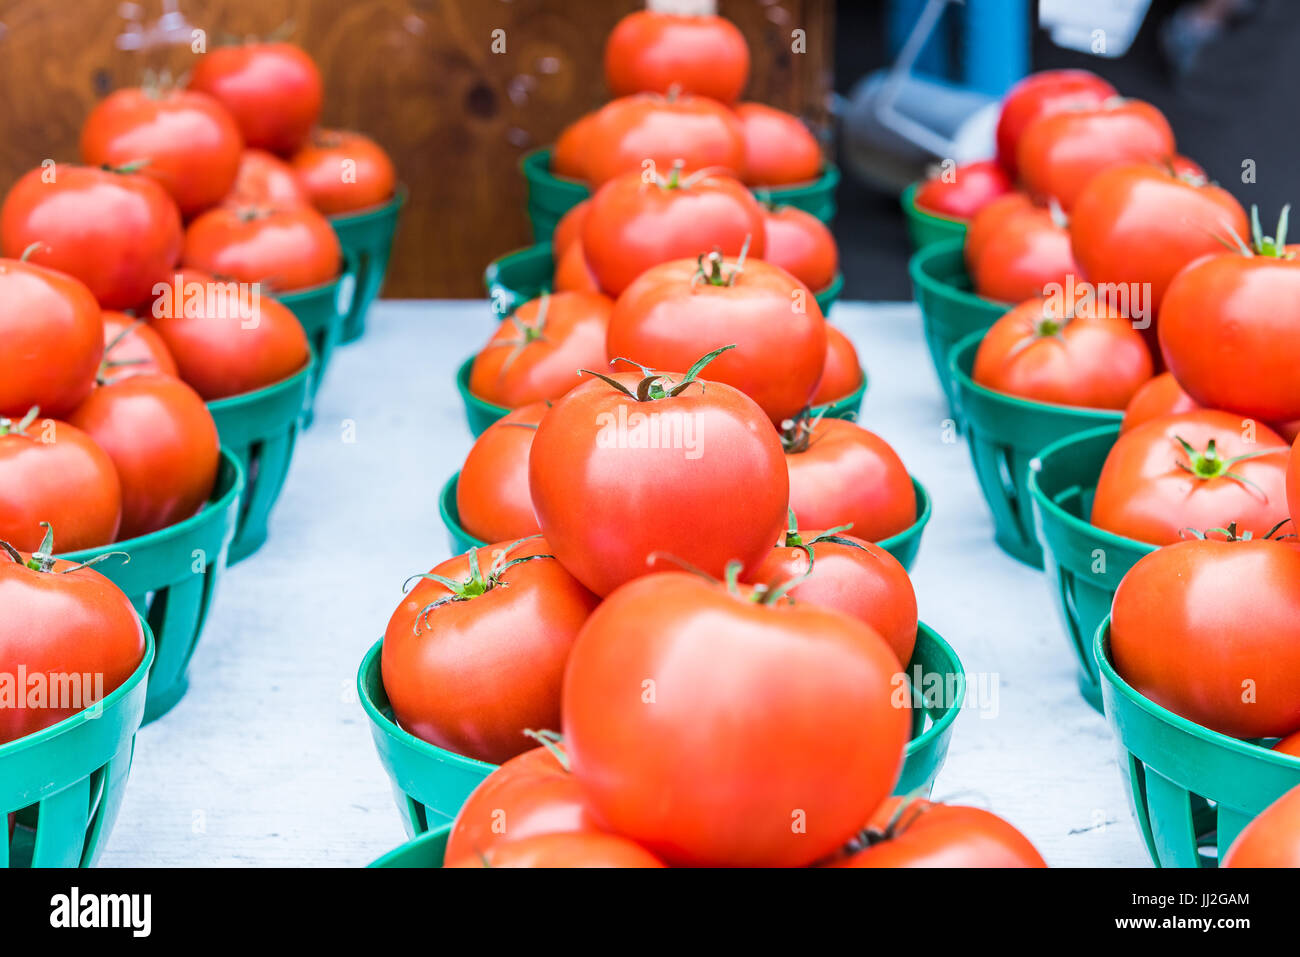 Closeup of red ripe tomatoes with green stems in baskets in farmers market Stock Photo